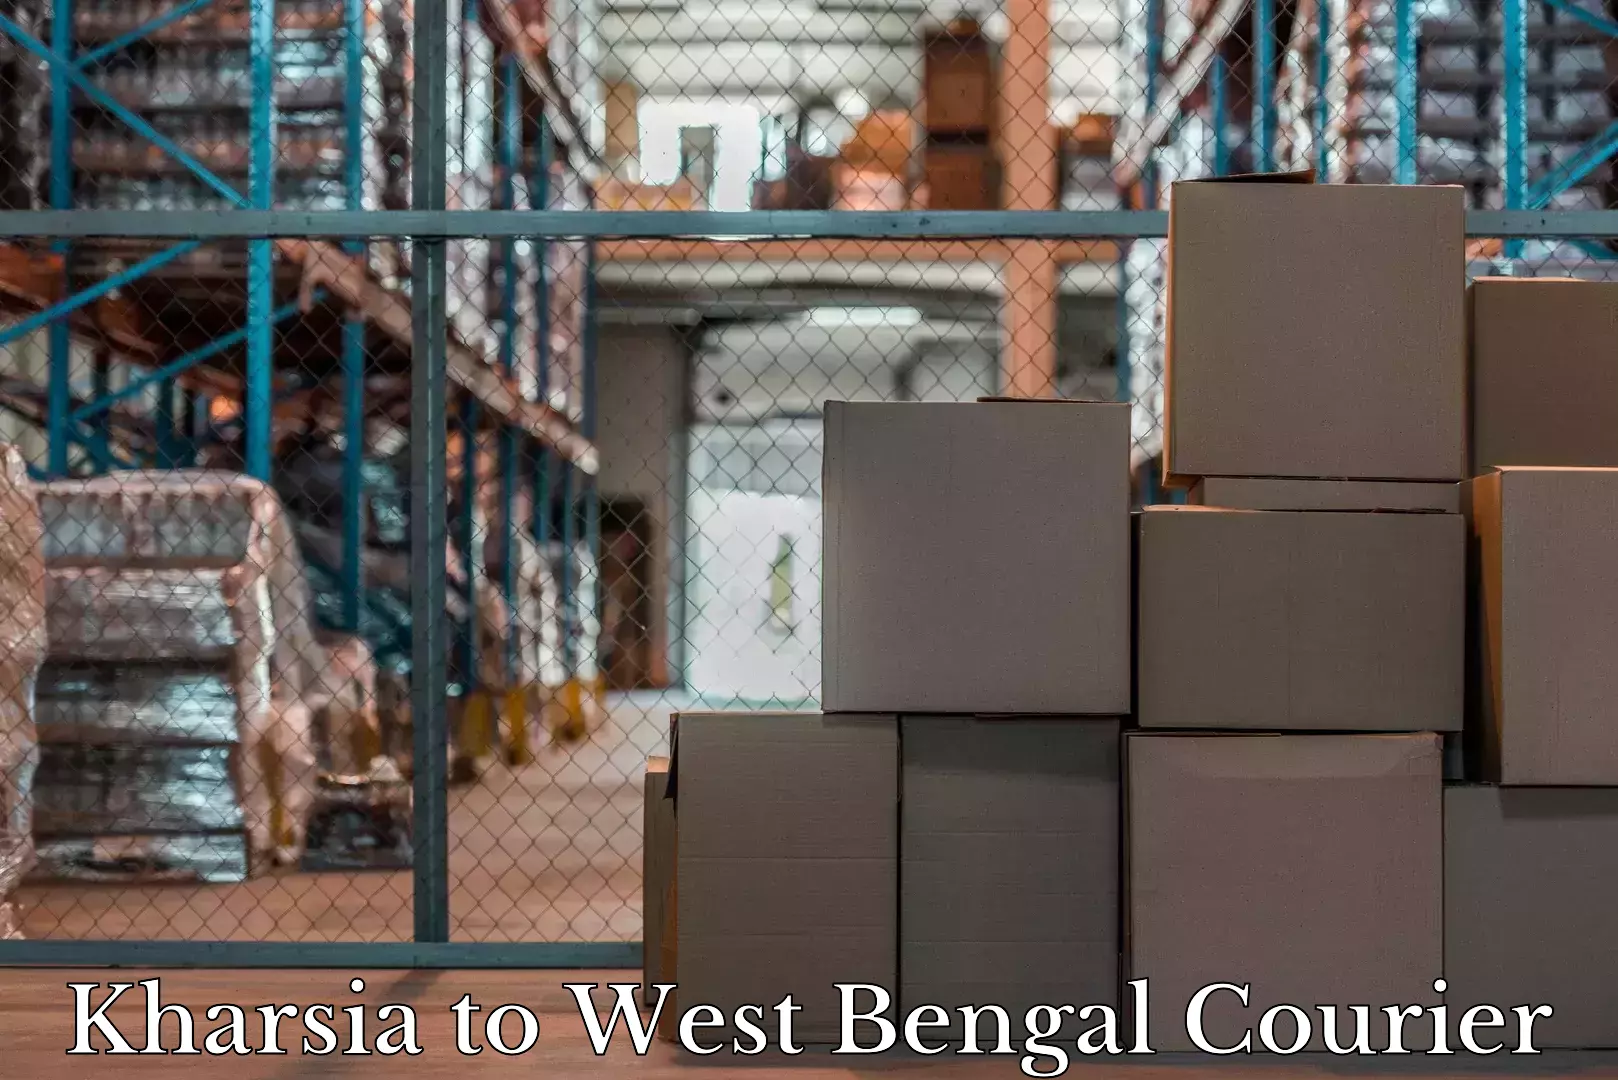 Baggage transport network Kharsia to Midnapore